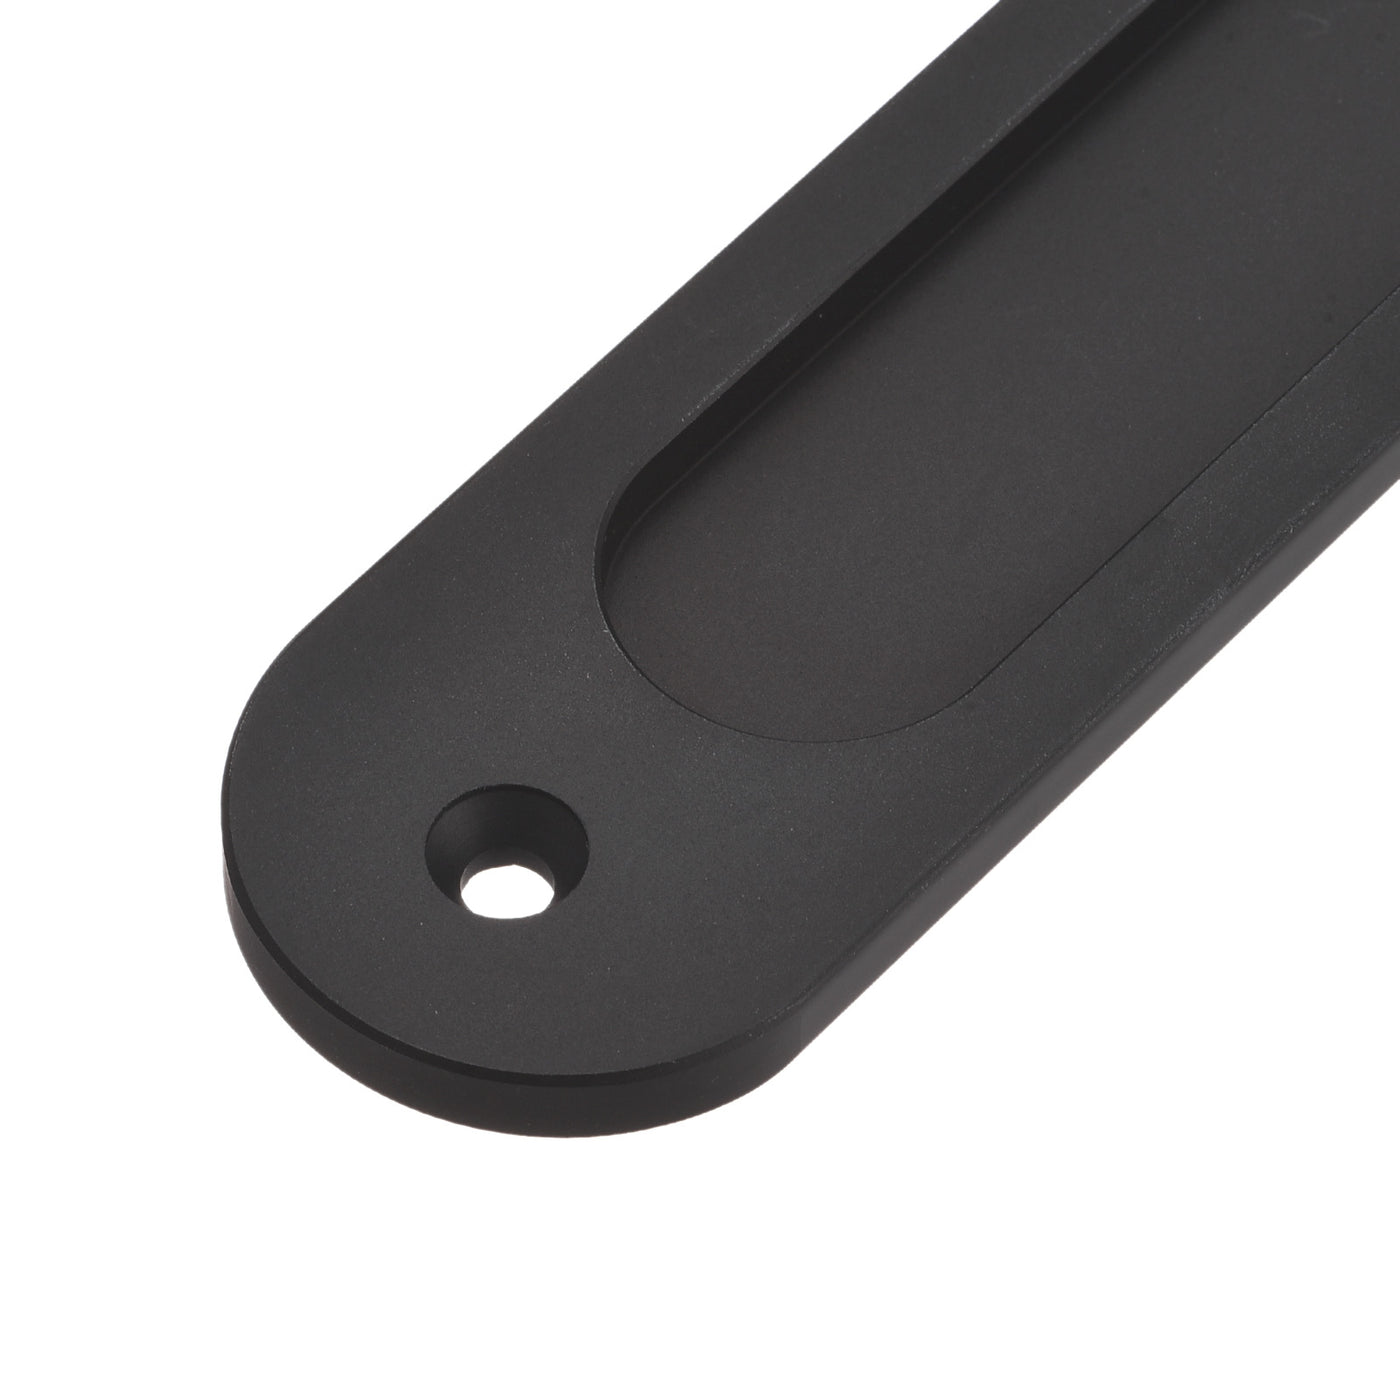 uxcell Uxcell Finger Flush Pull Handle 180x40x5.7mm Oval for Drawer Door Black